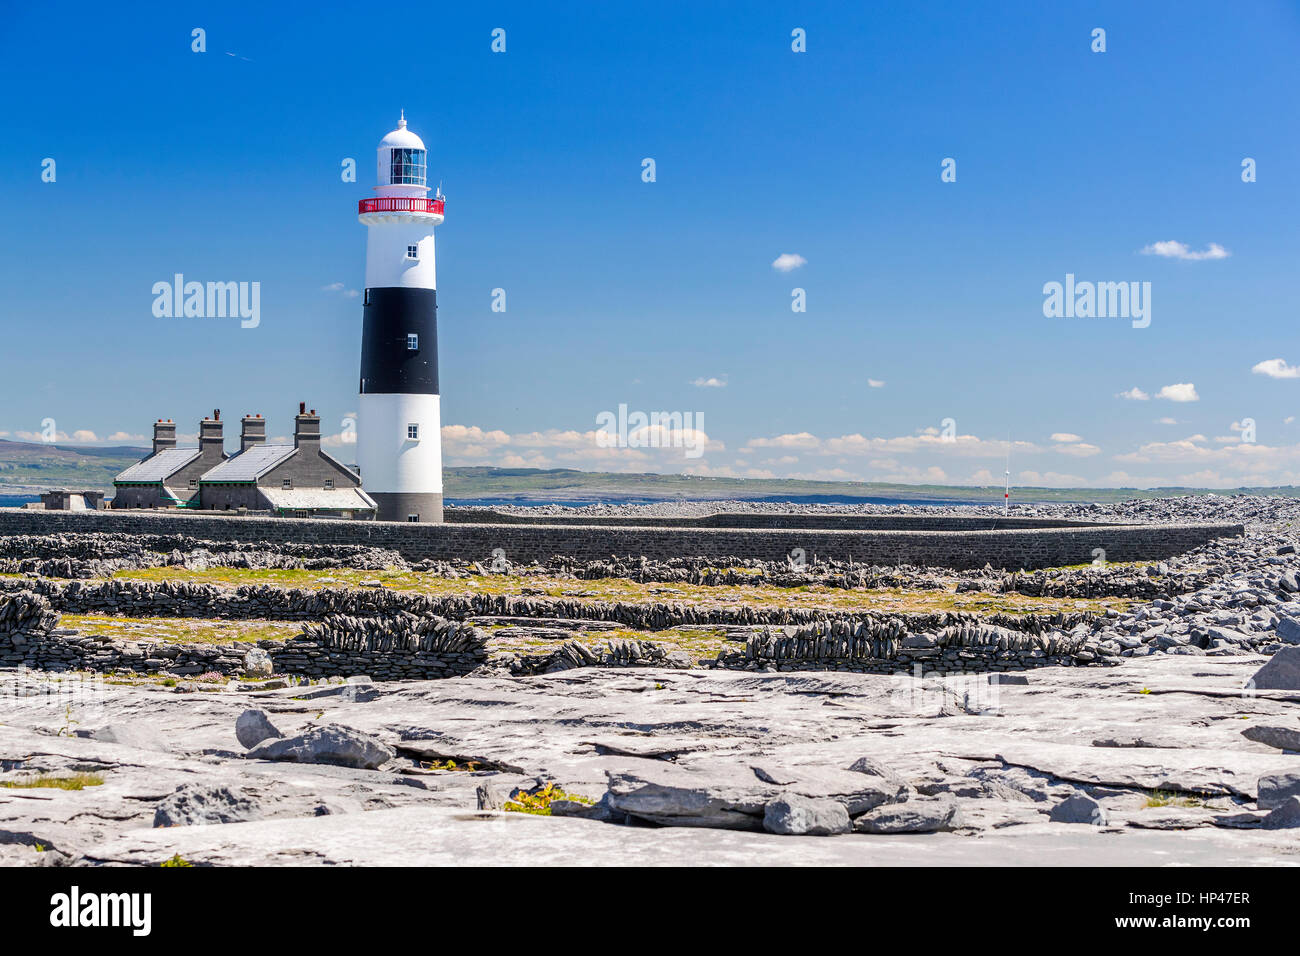 Lighthouse at Inis Oirr, County Galway, Ireland, Europe. Stock Photo